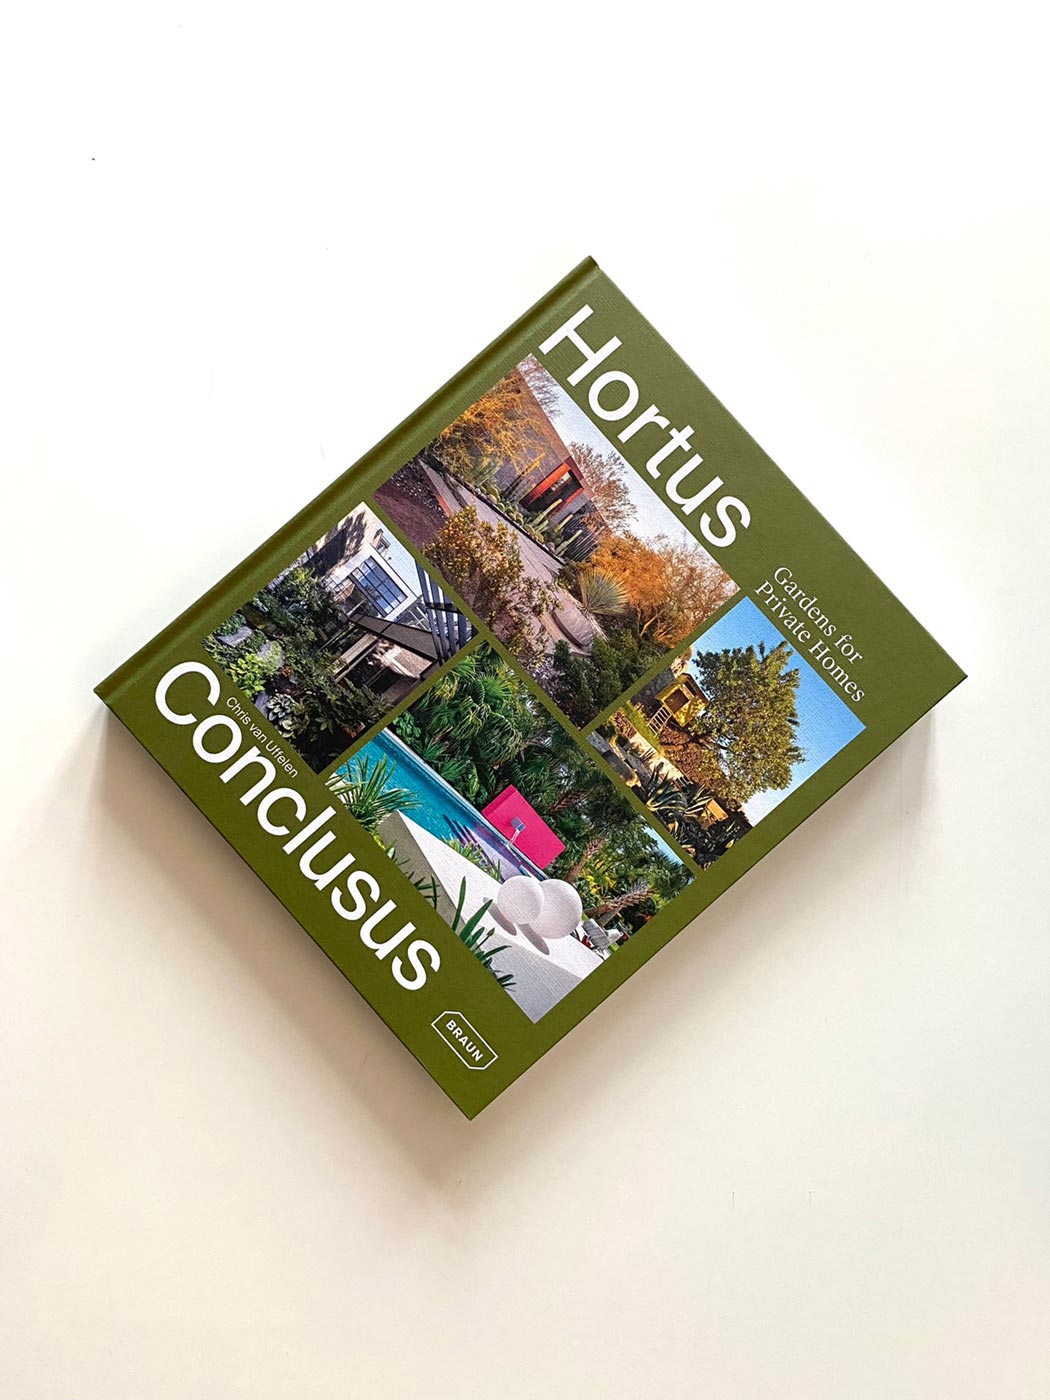 Our Projects are published in Braun Publishing’s Hortus Conclusus Book